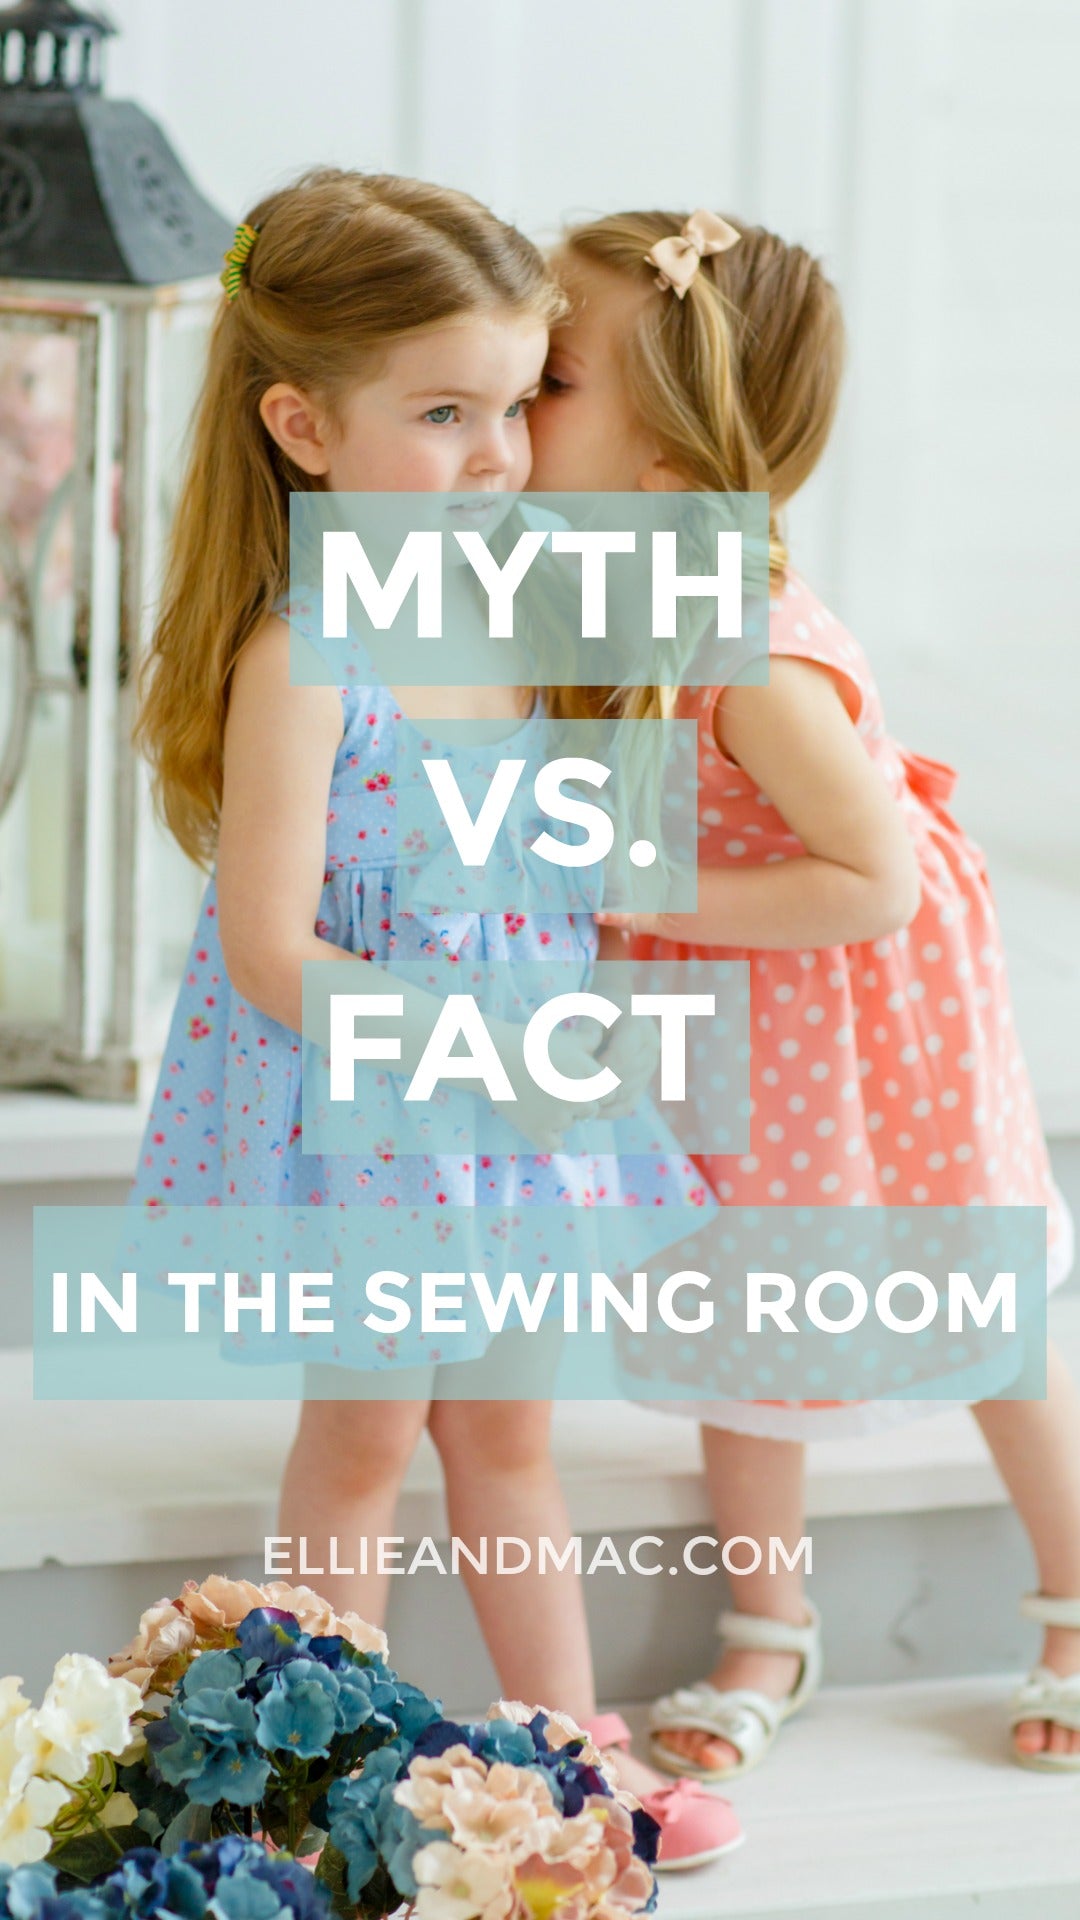 Myth Vs. Fact In The Sewing Room